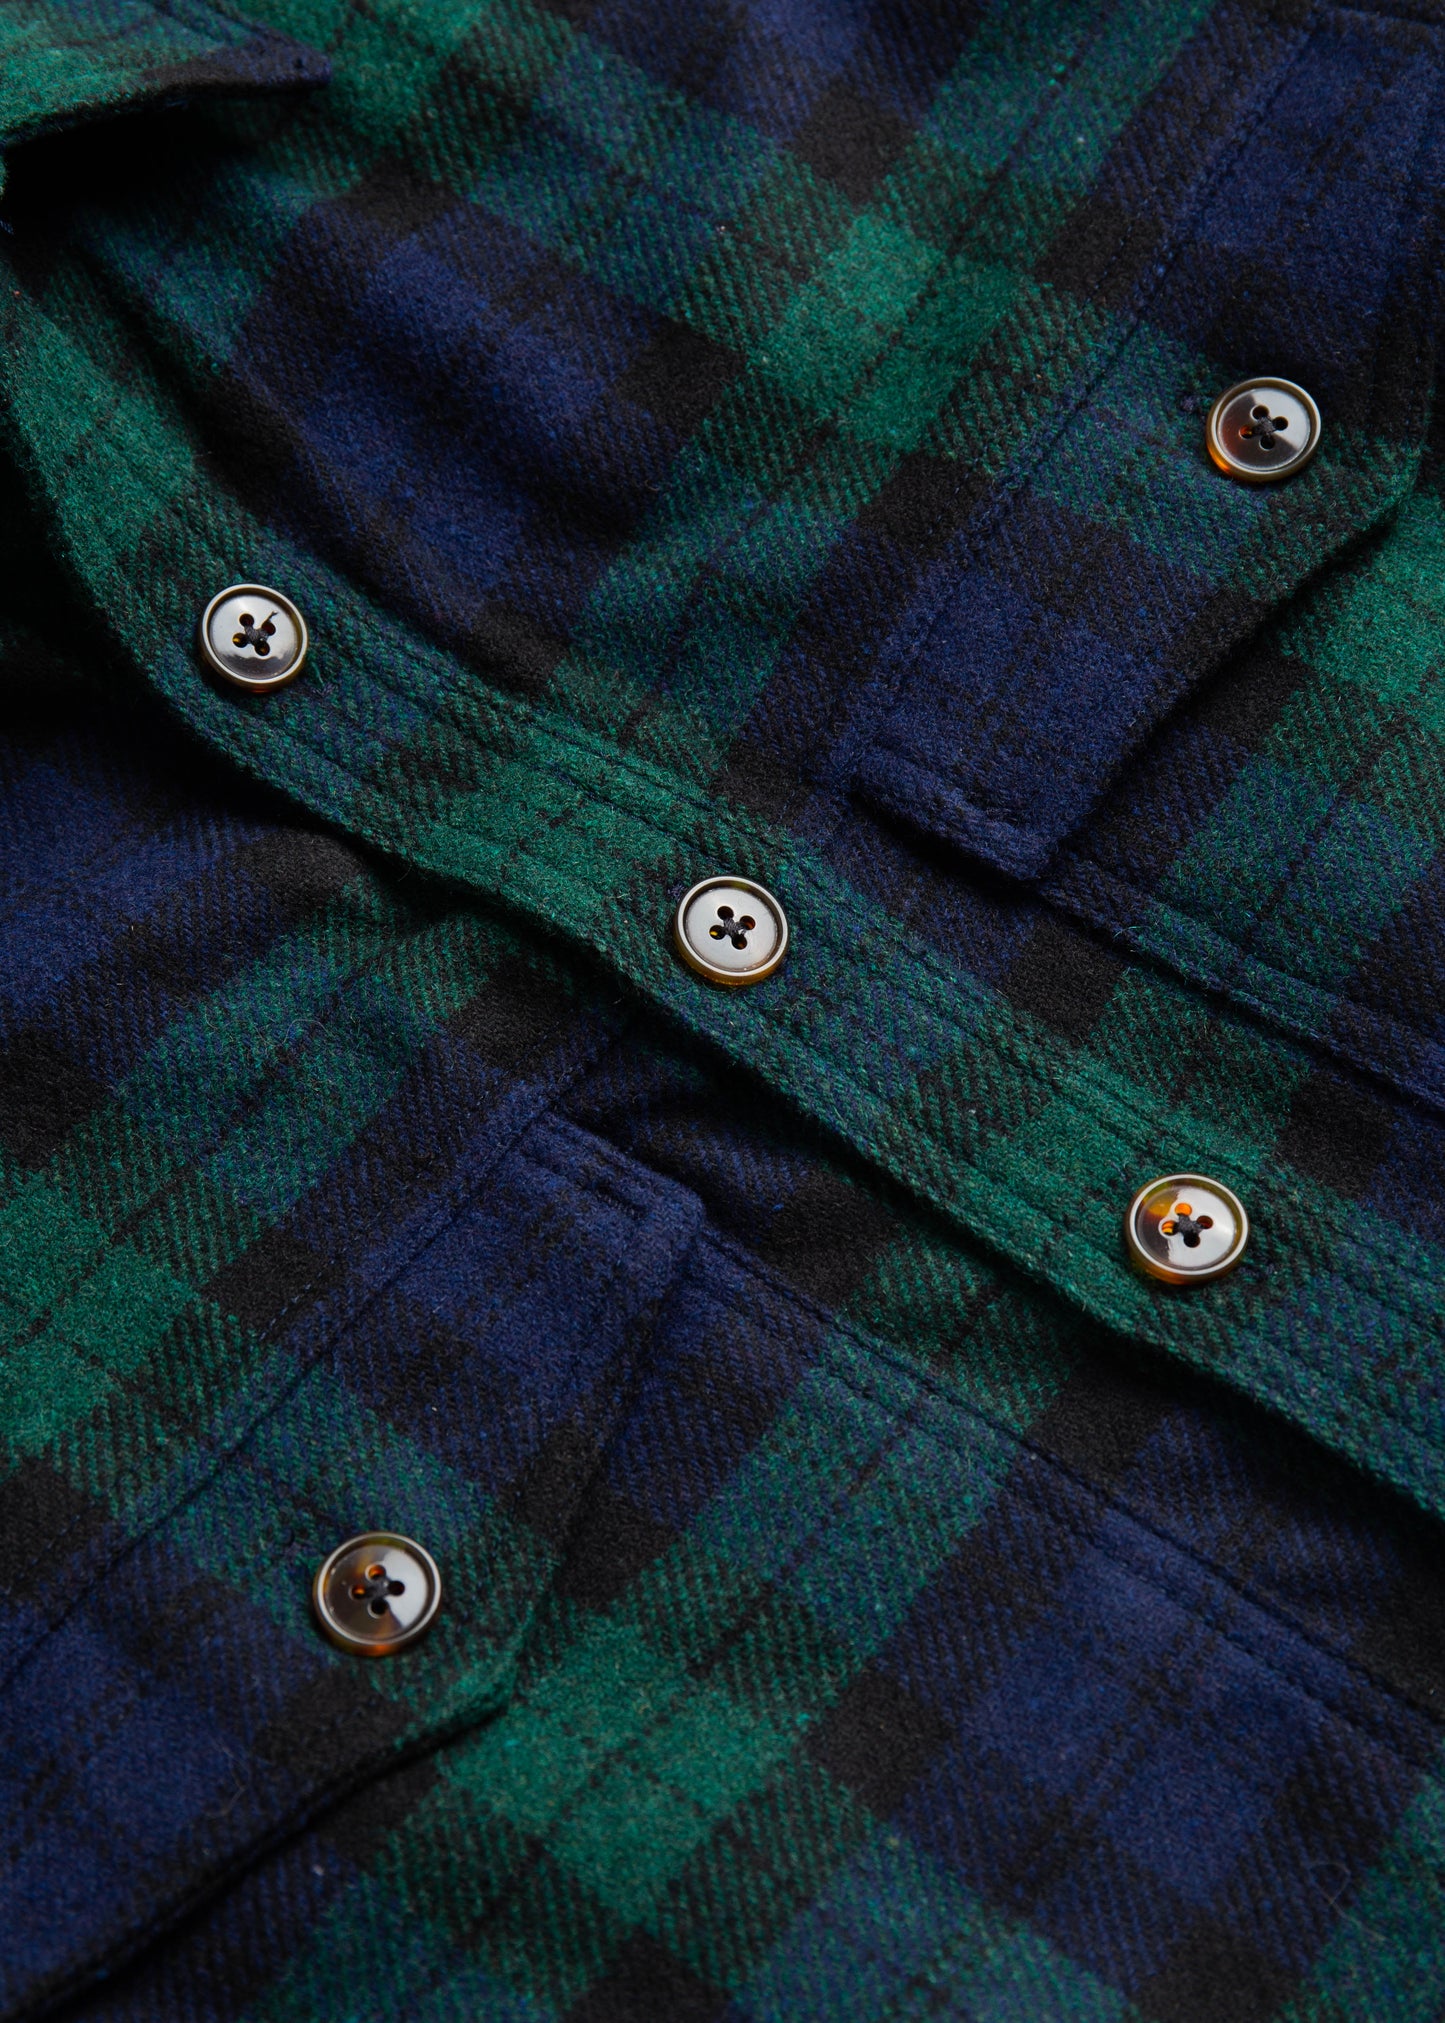 Close up of double pocket shirt jacket in color blackwatch wool buttons and fabric